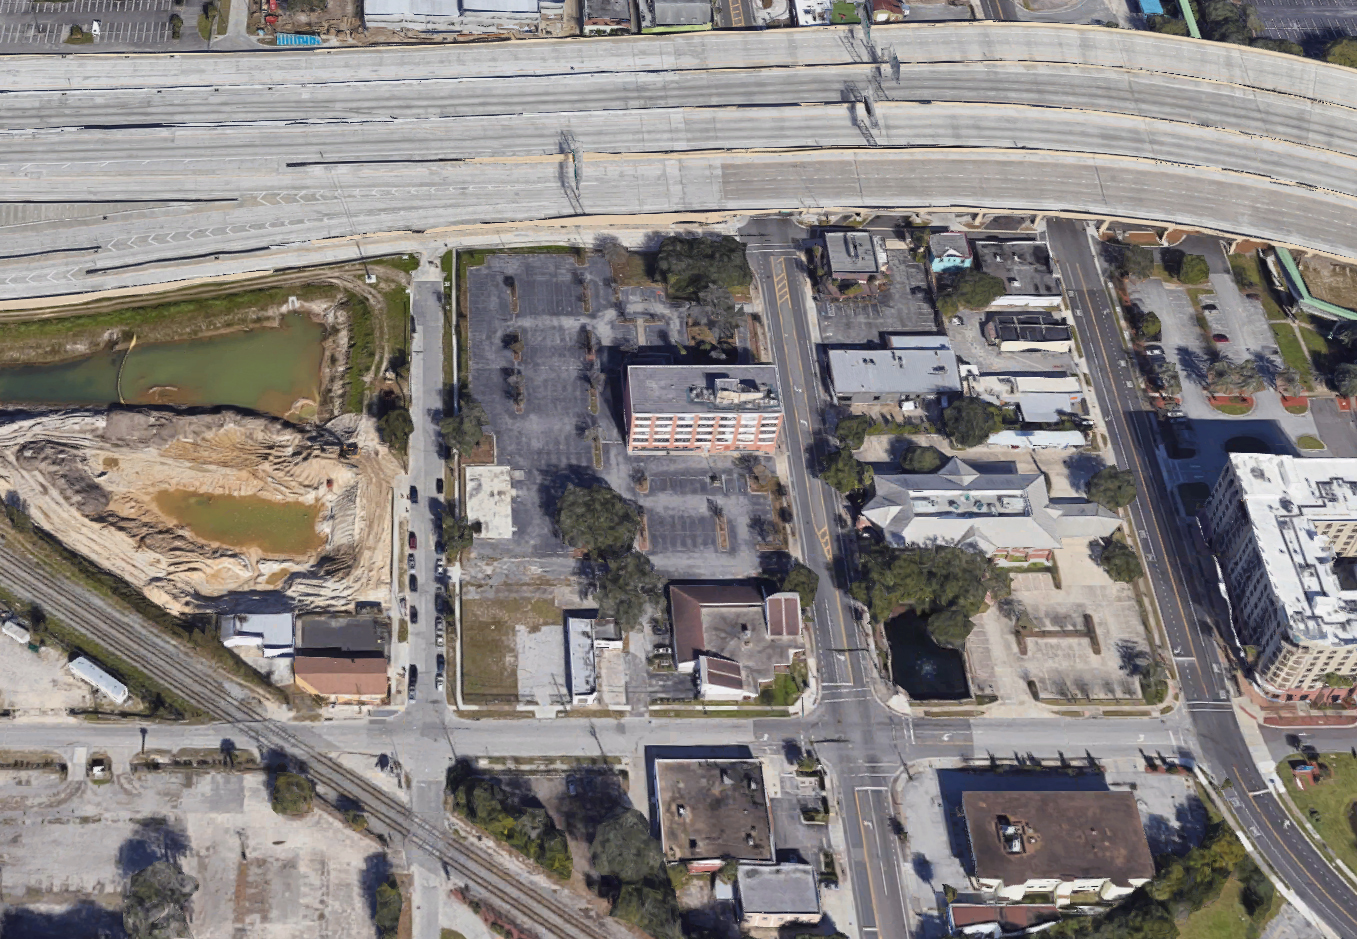 A satellite image of the  1230 Hendricks adjacent to Interstate 95. The  Florida Baptist Convention on the property have been demolished.